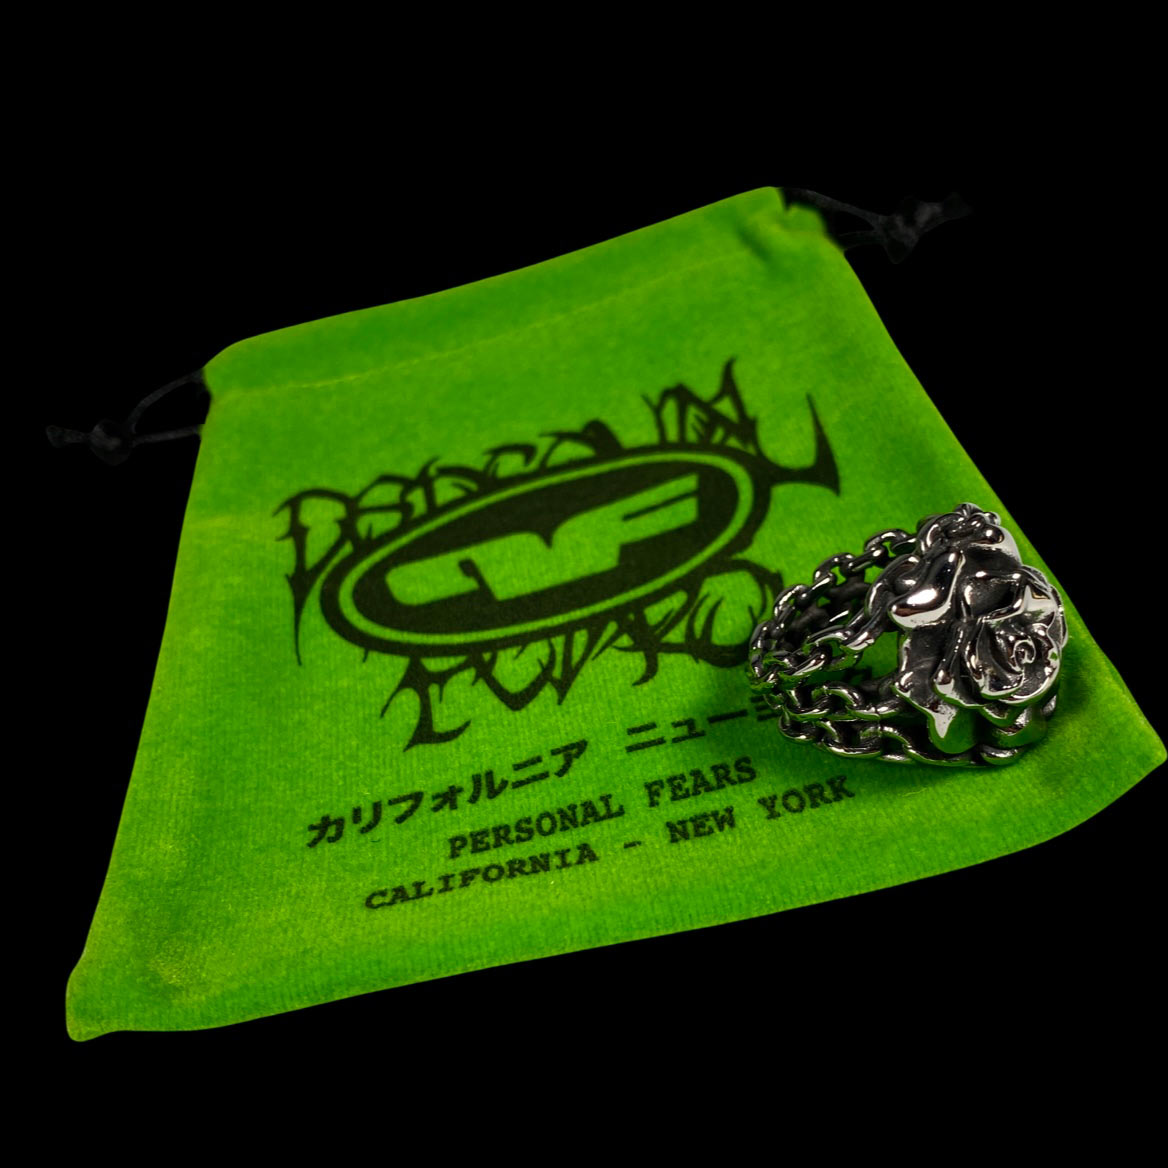 Personal Fears Rose in Chains Ring Green Bag Stainless Steel Jewelry